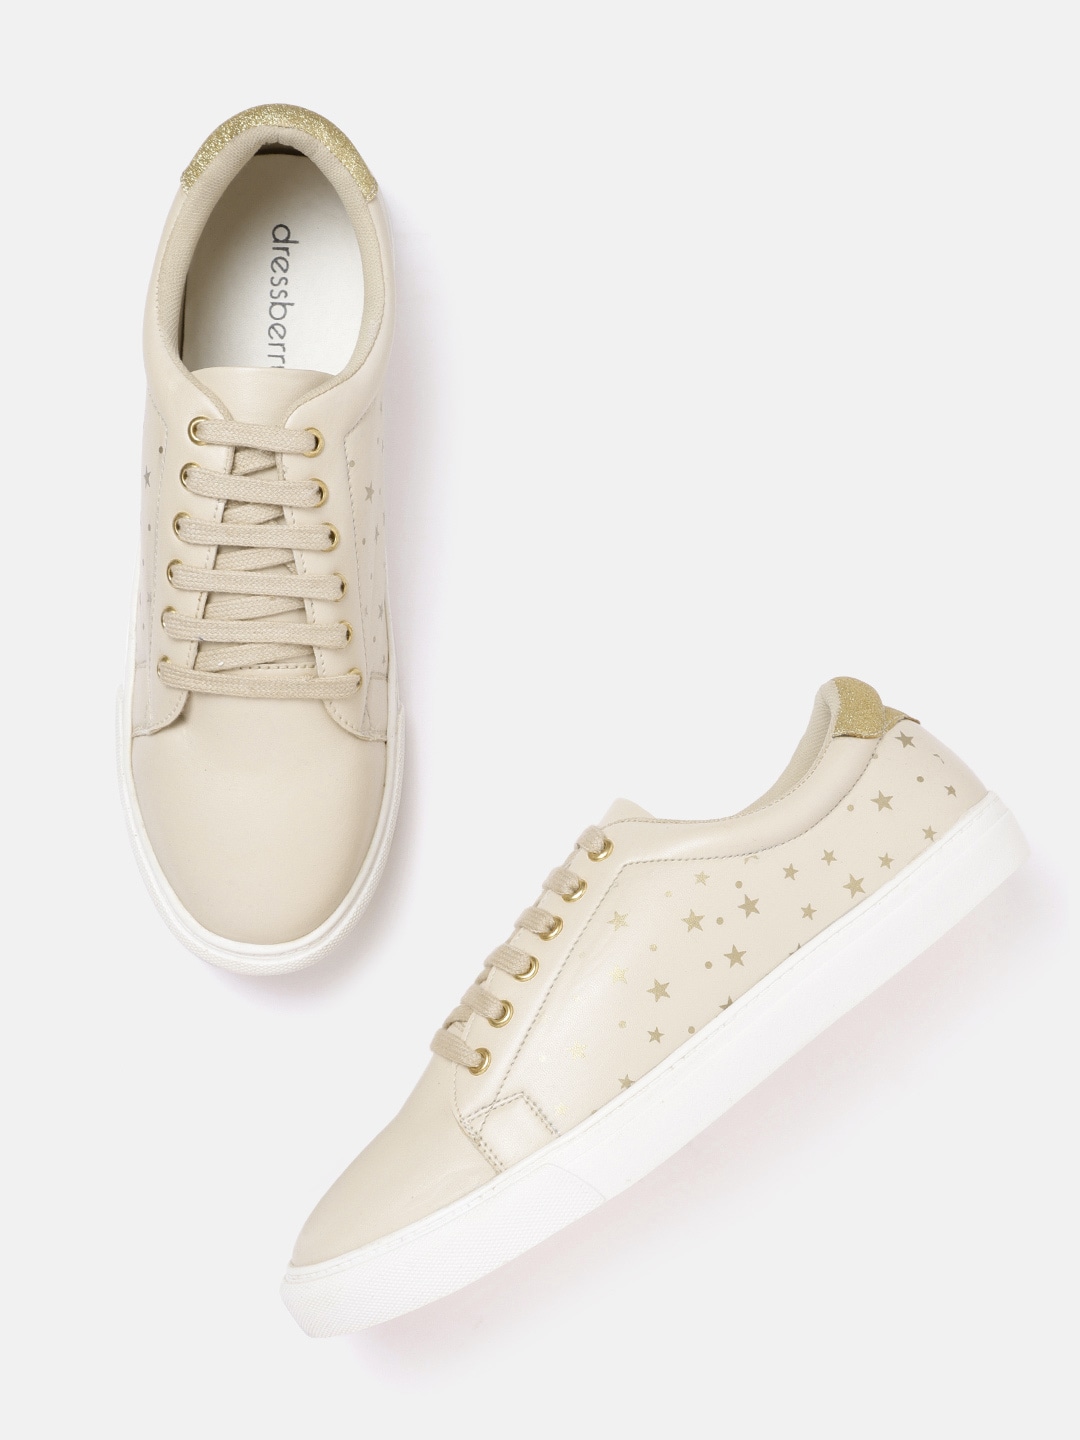 DressBerry Women Beige & Gol-Toned Star Printed Leather Sneakers Price in India